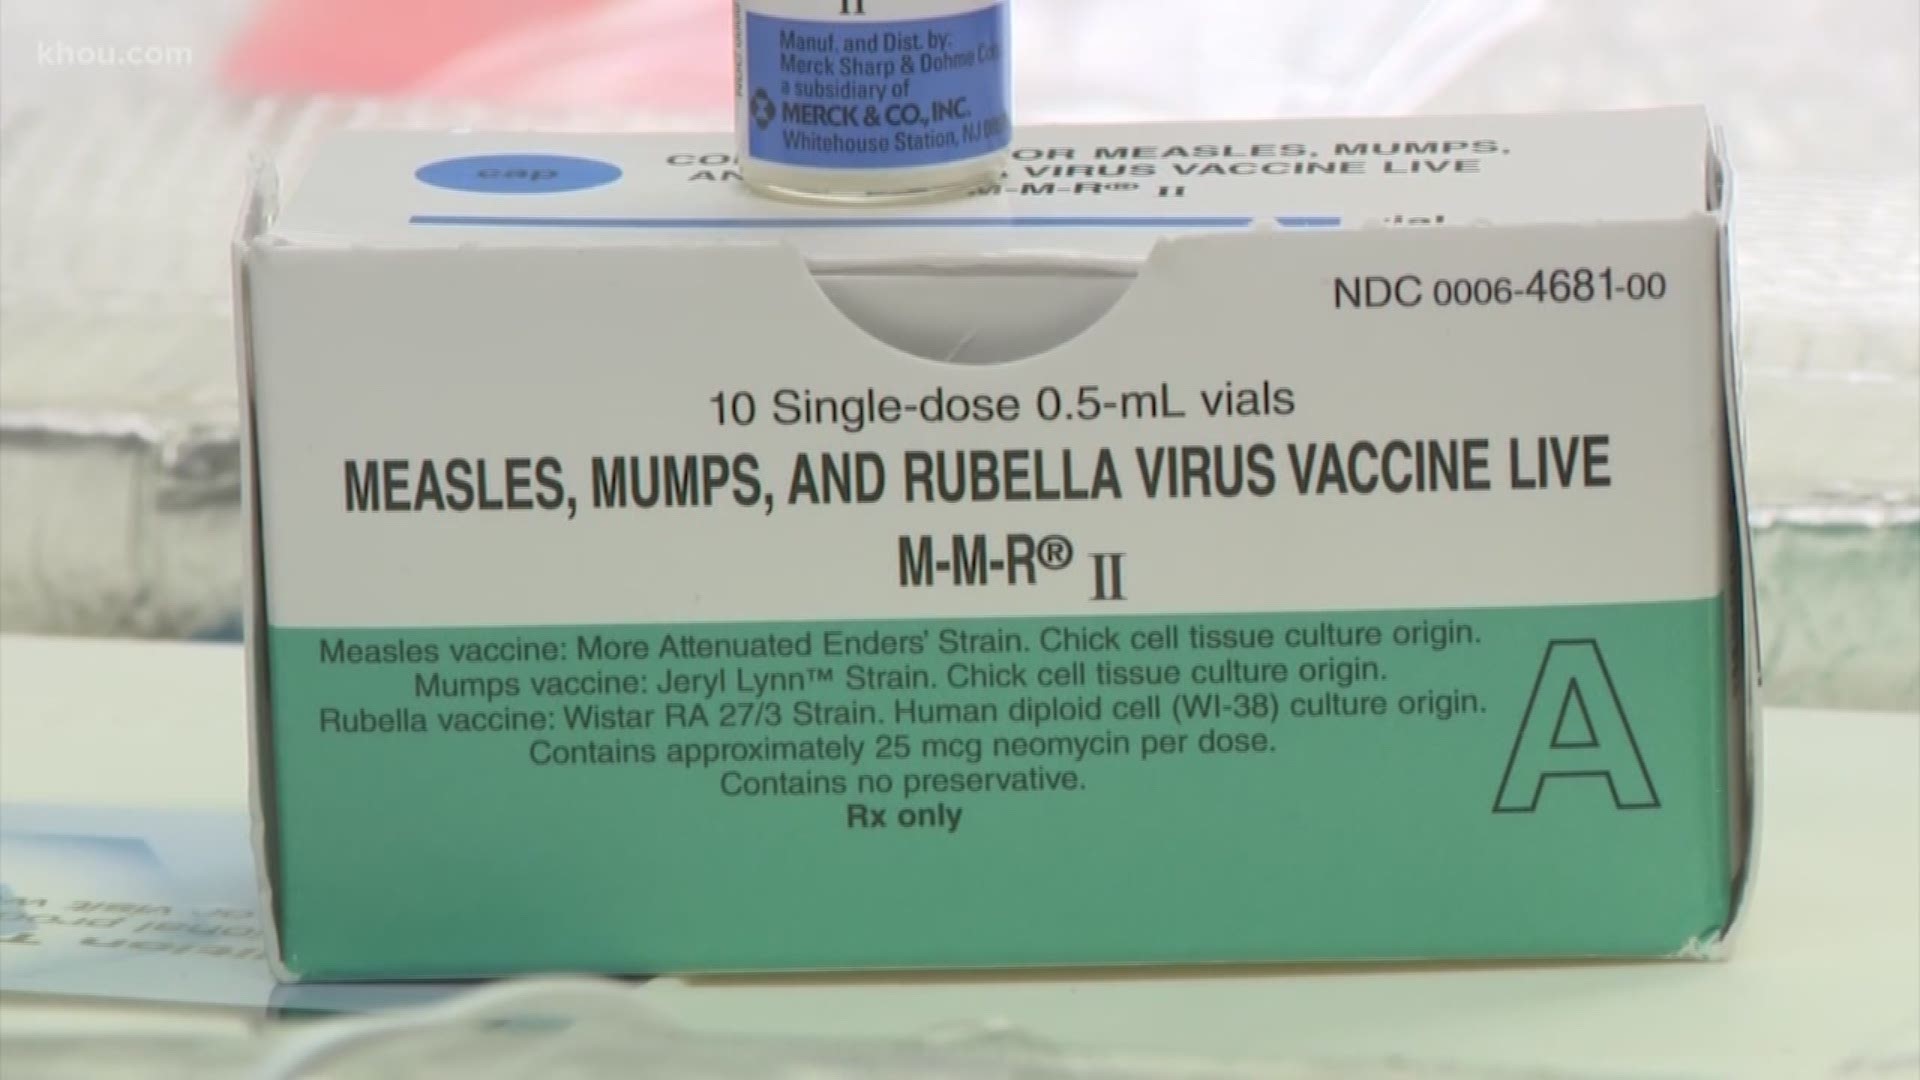 Measles cases are on the rise again. The CDC says 555 cases have been confirmed in 20 states, including Texas. The World Health Organization says measles cases are up 300 percent in the first three months of 2019.